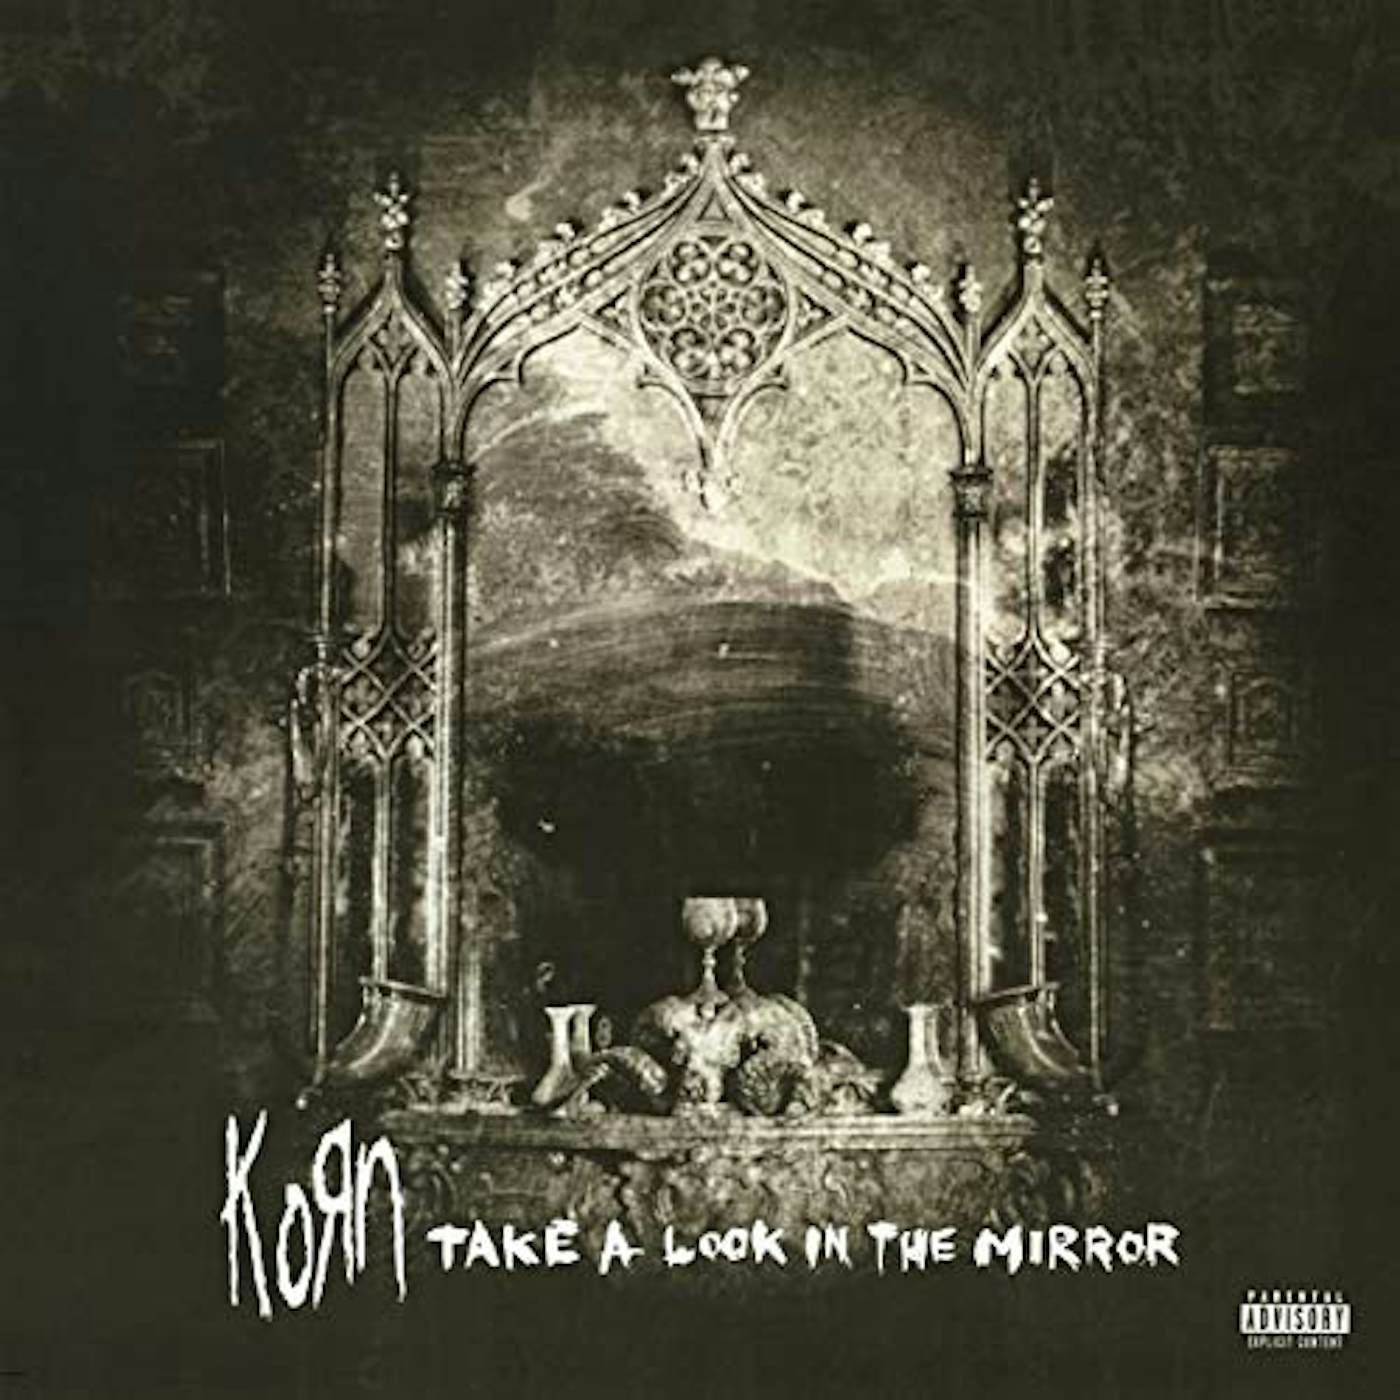 Korn Take A Look In The Mirror Vinyl Record